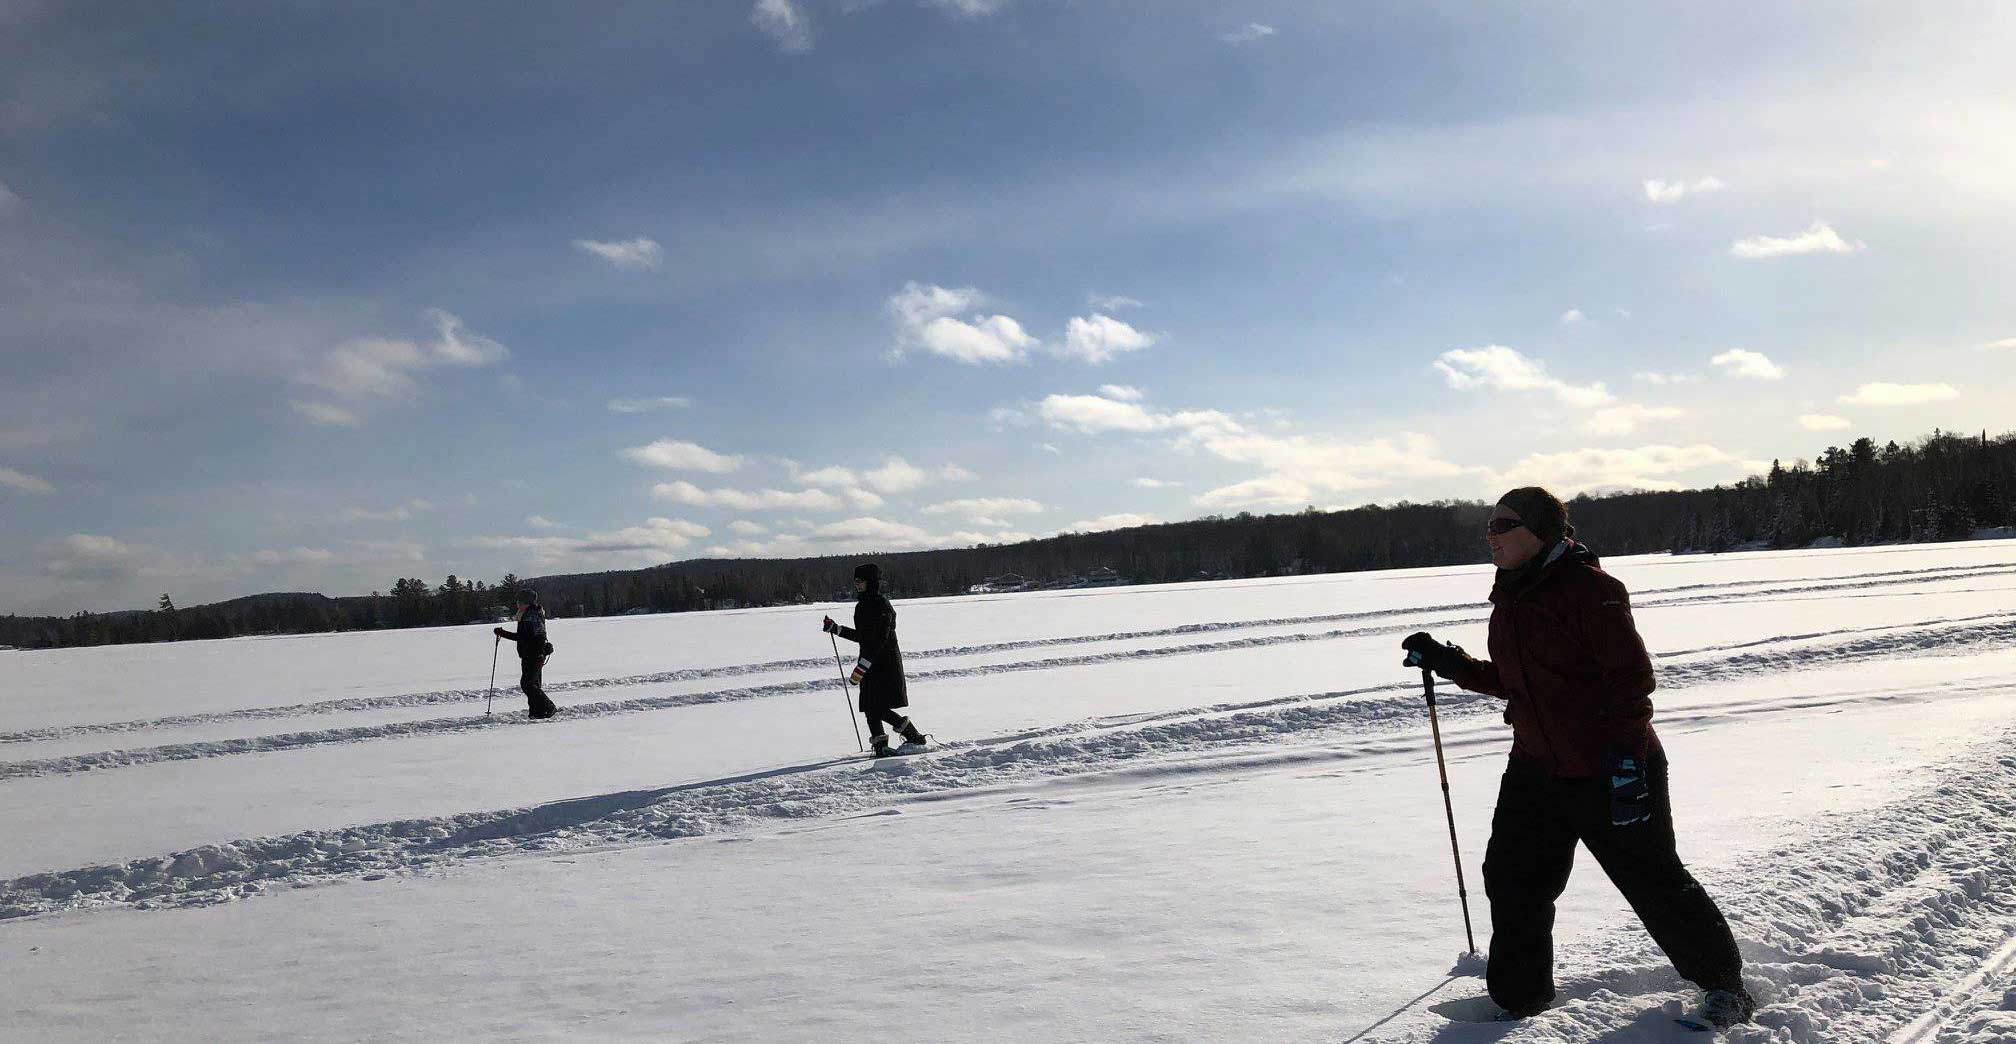 A group skiing across the frozen lake in unison